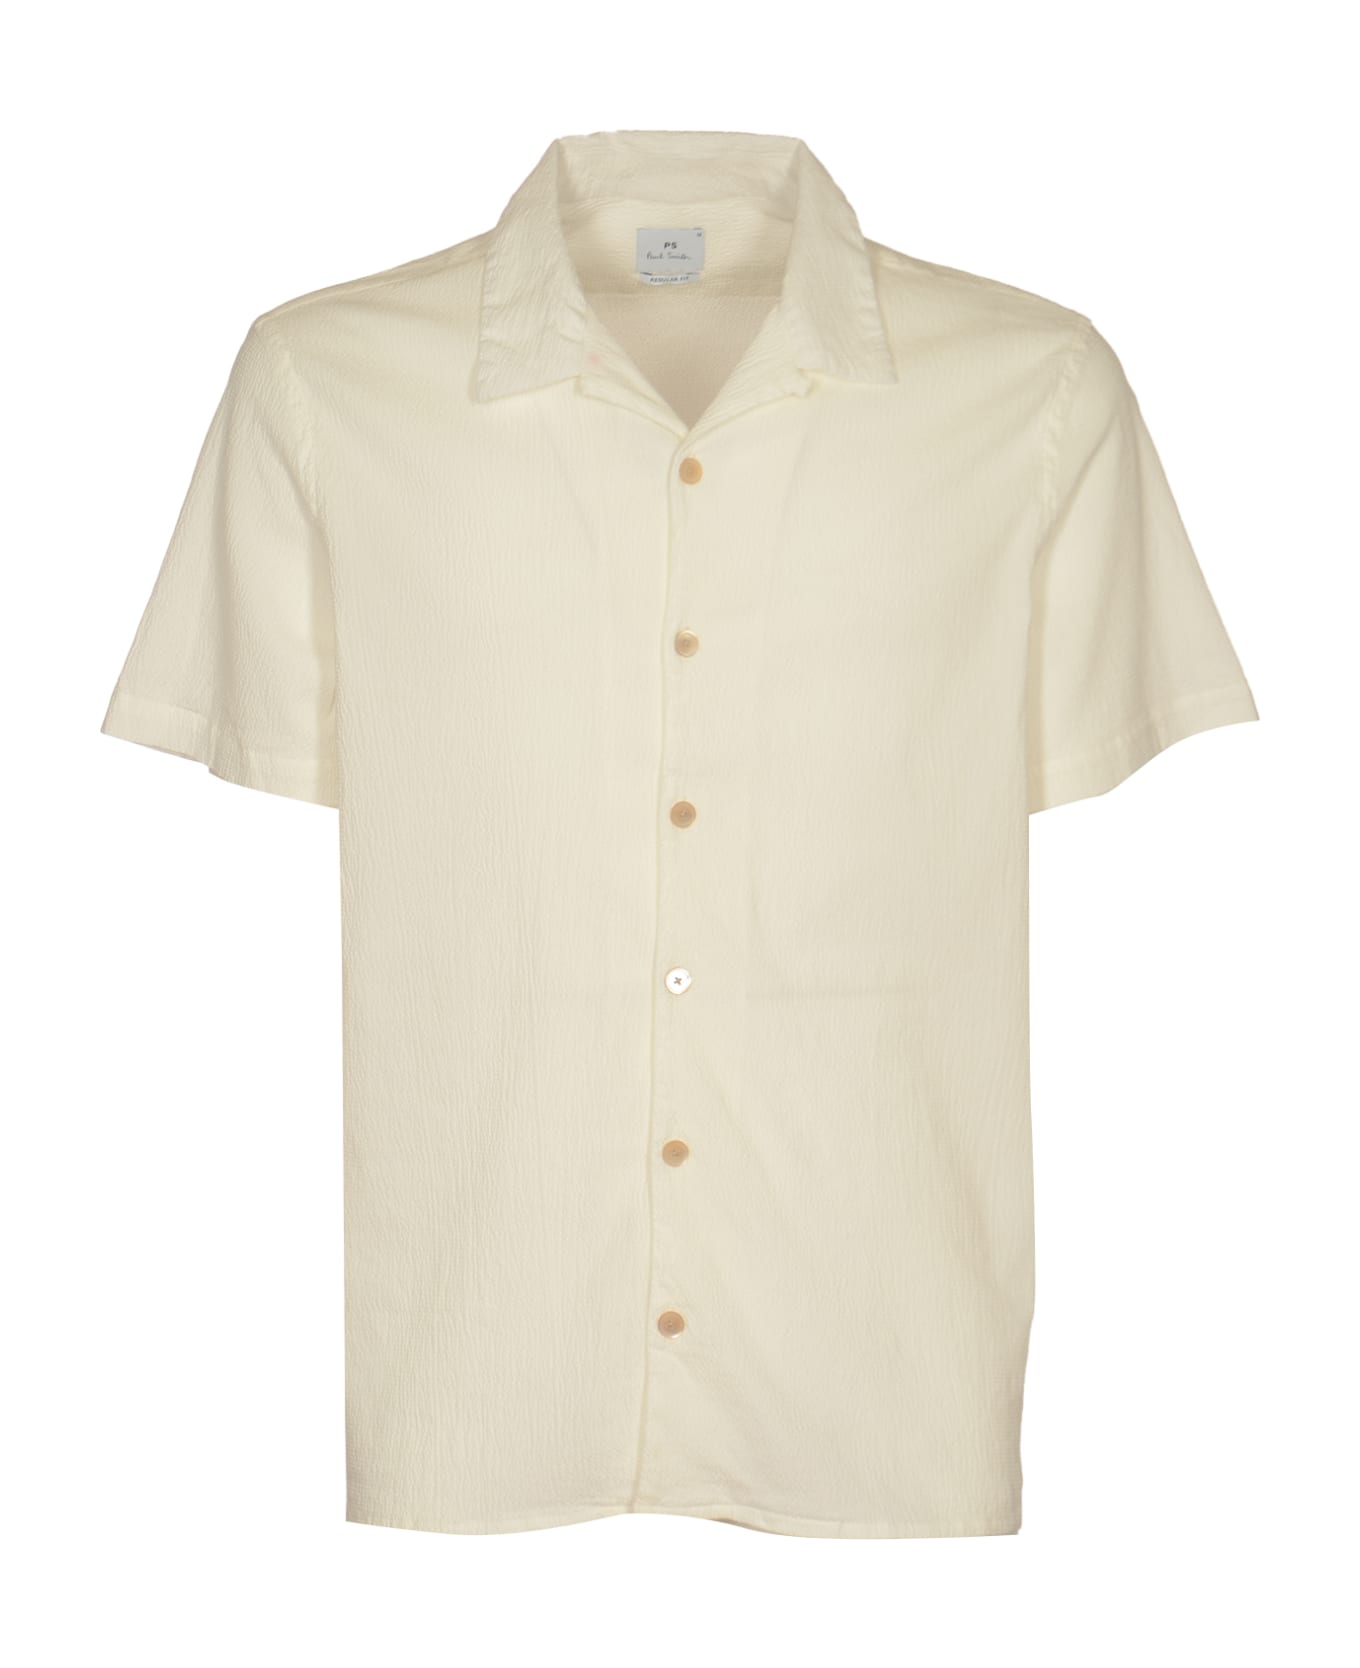 PS by Paul Smith Formal Plain Short-sleeved Shirt - Off White